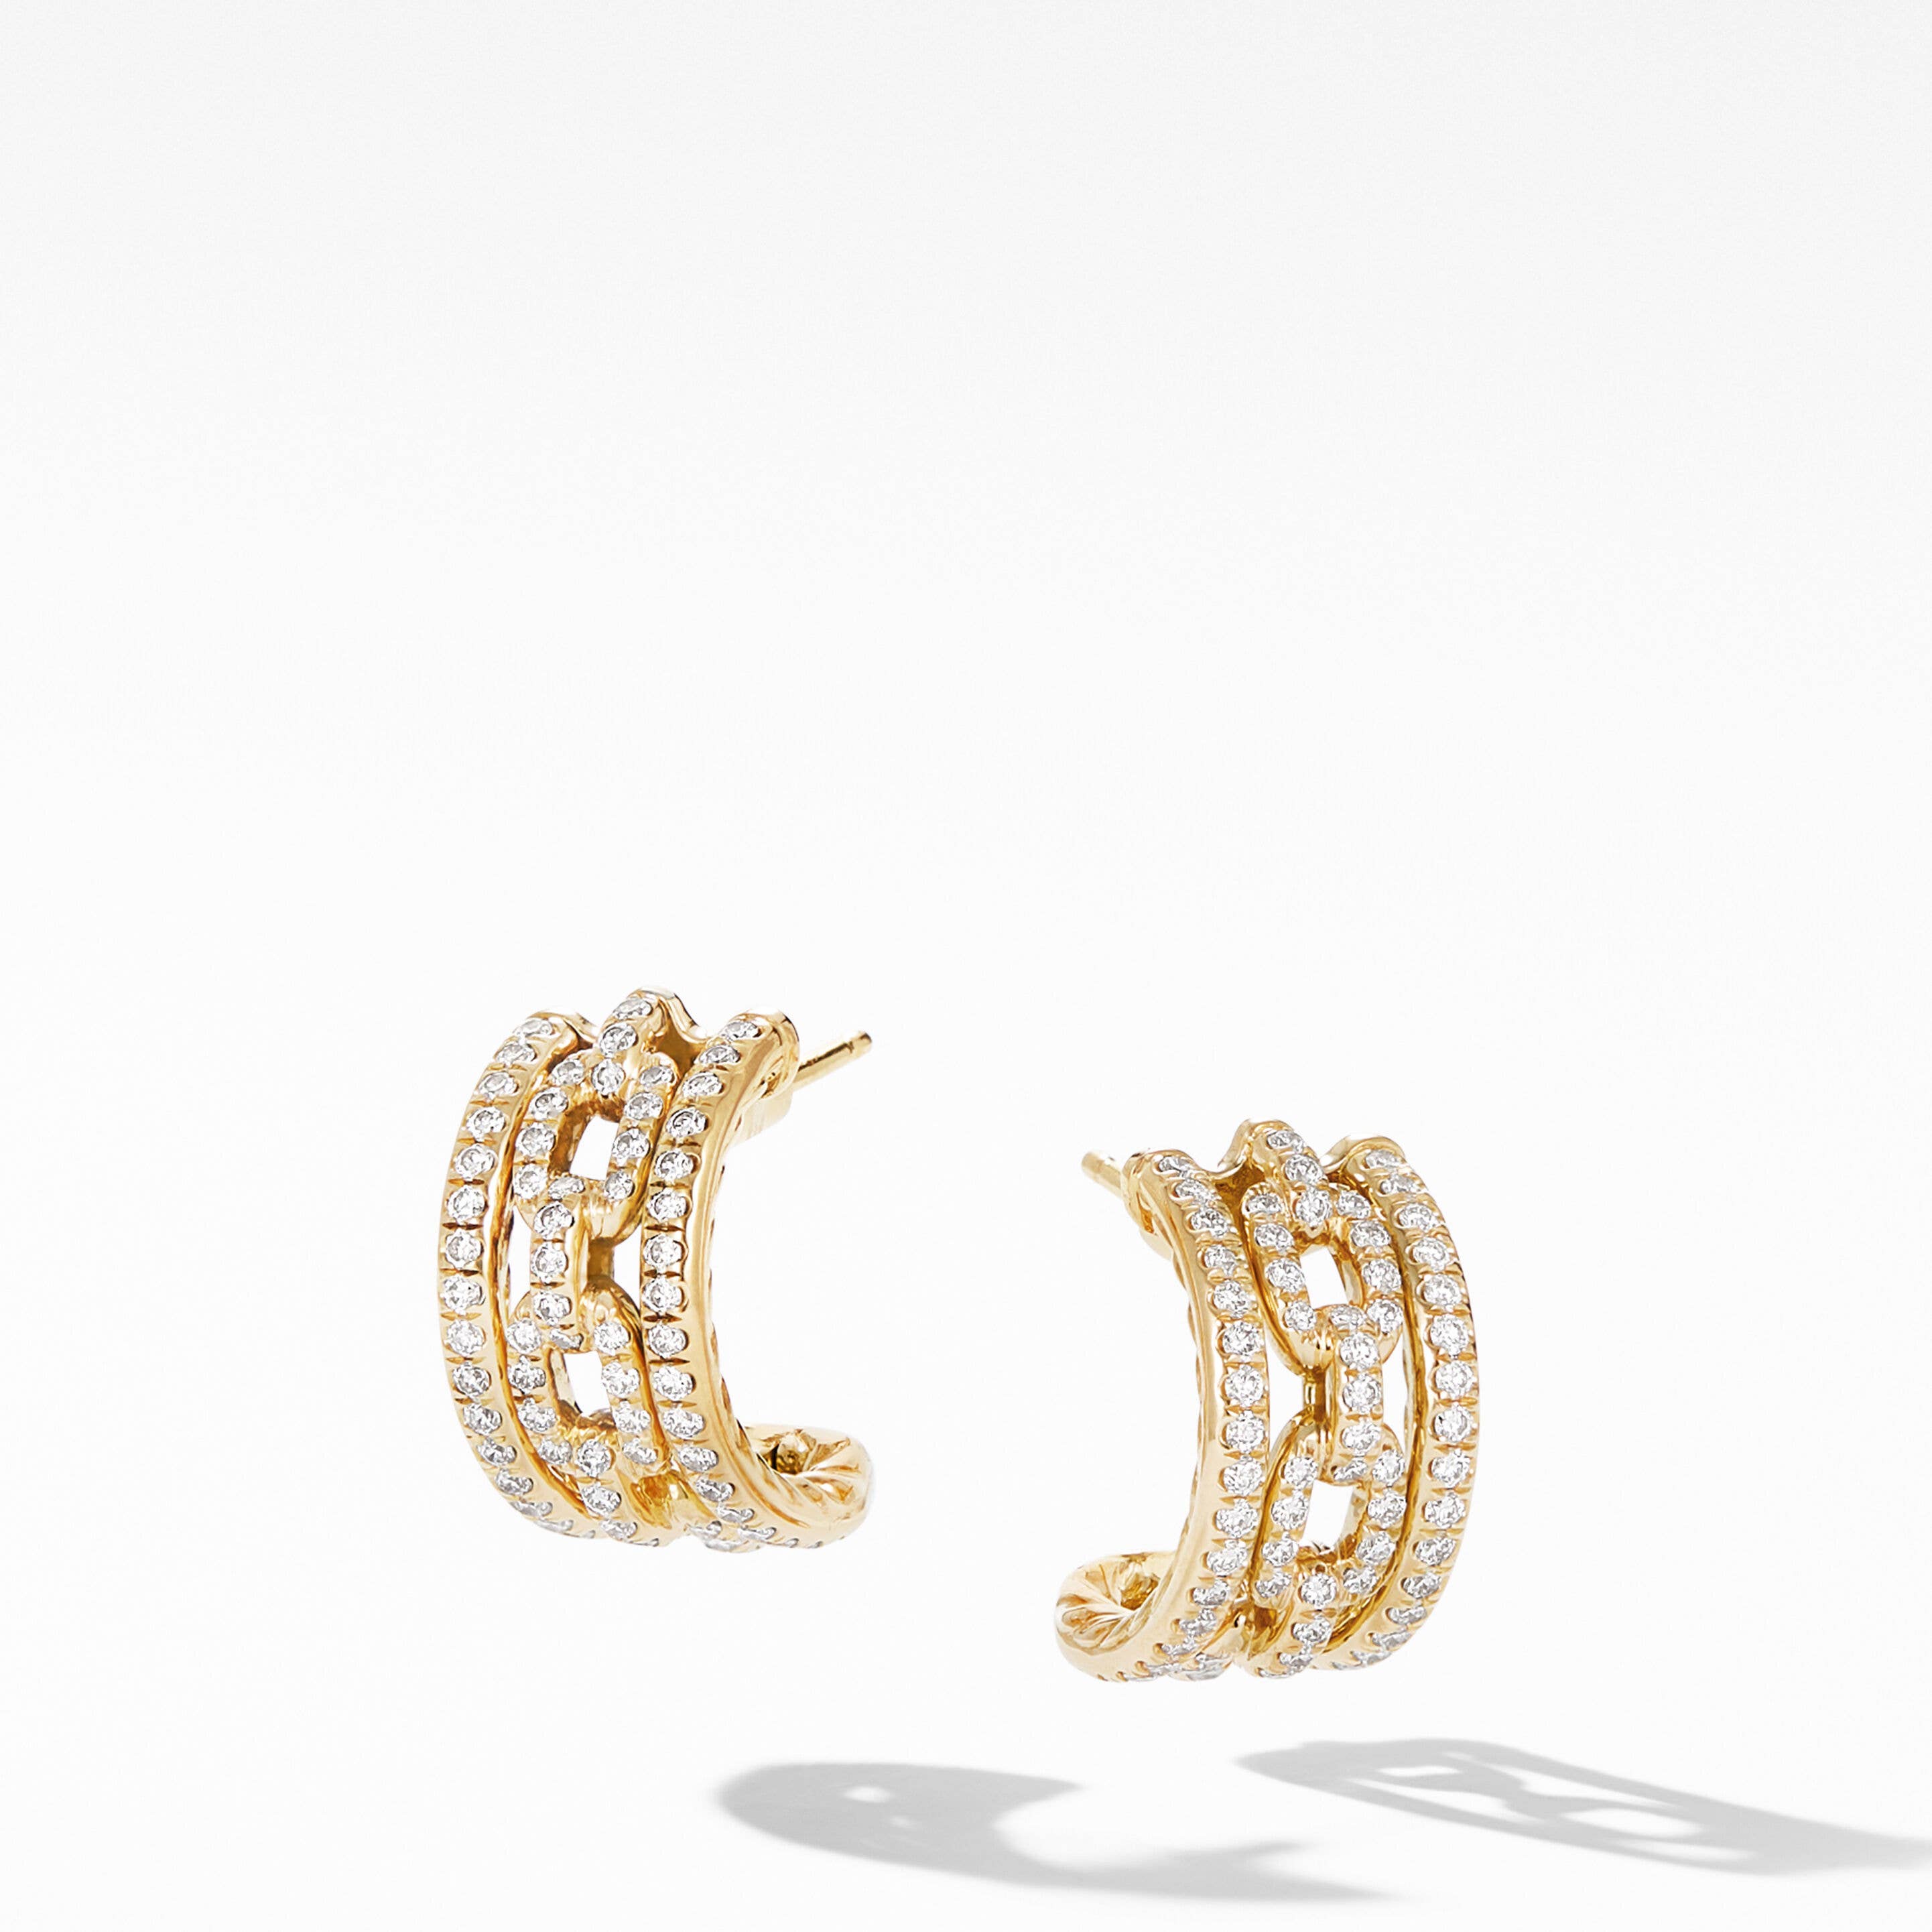 Stax Chain Link Huggie Hoop Earrings in 18K Yellow Gold with Pavé Diamonds